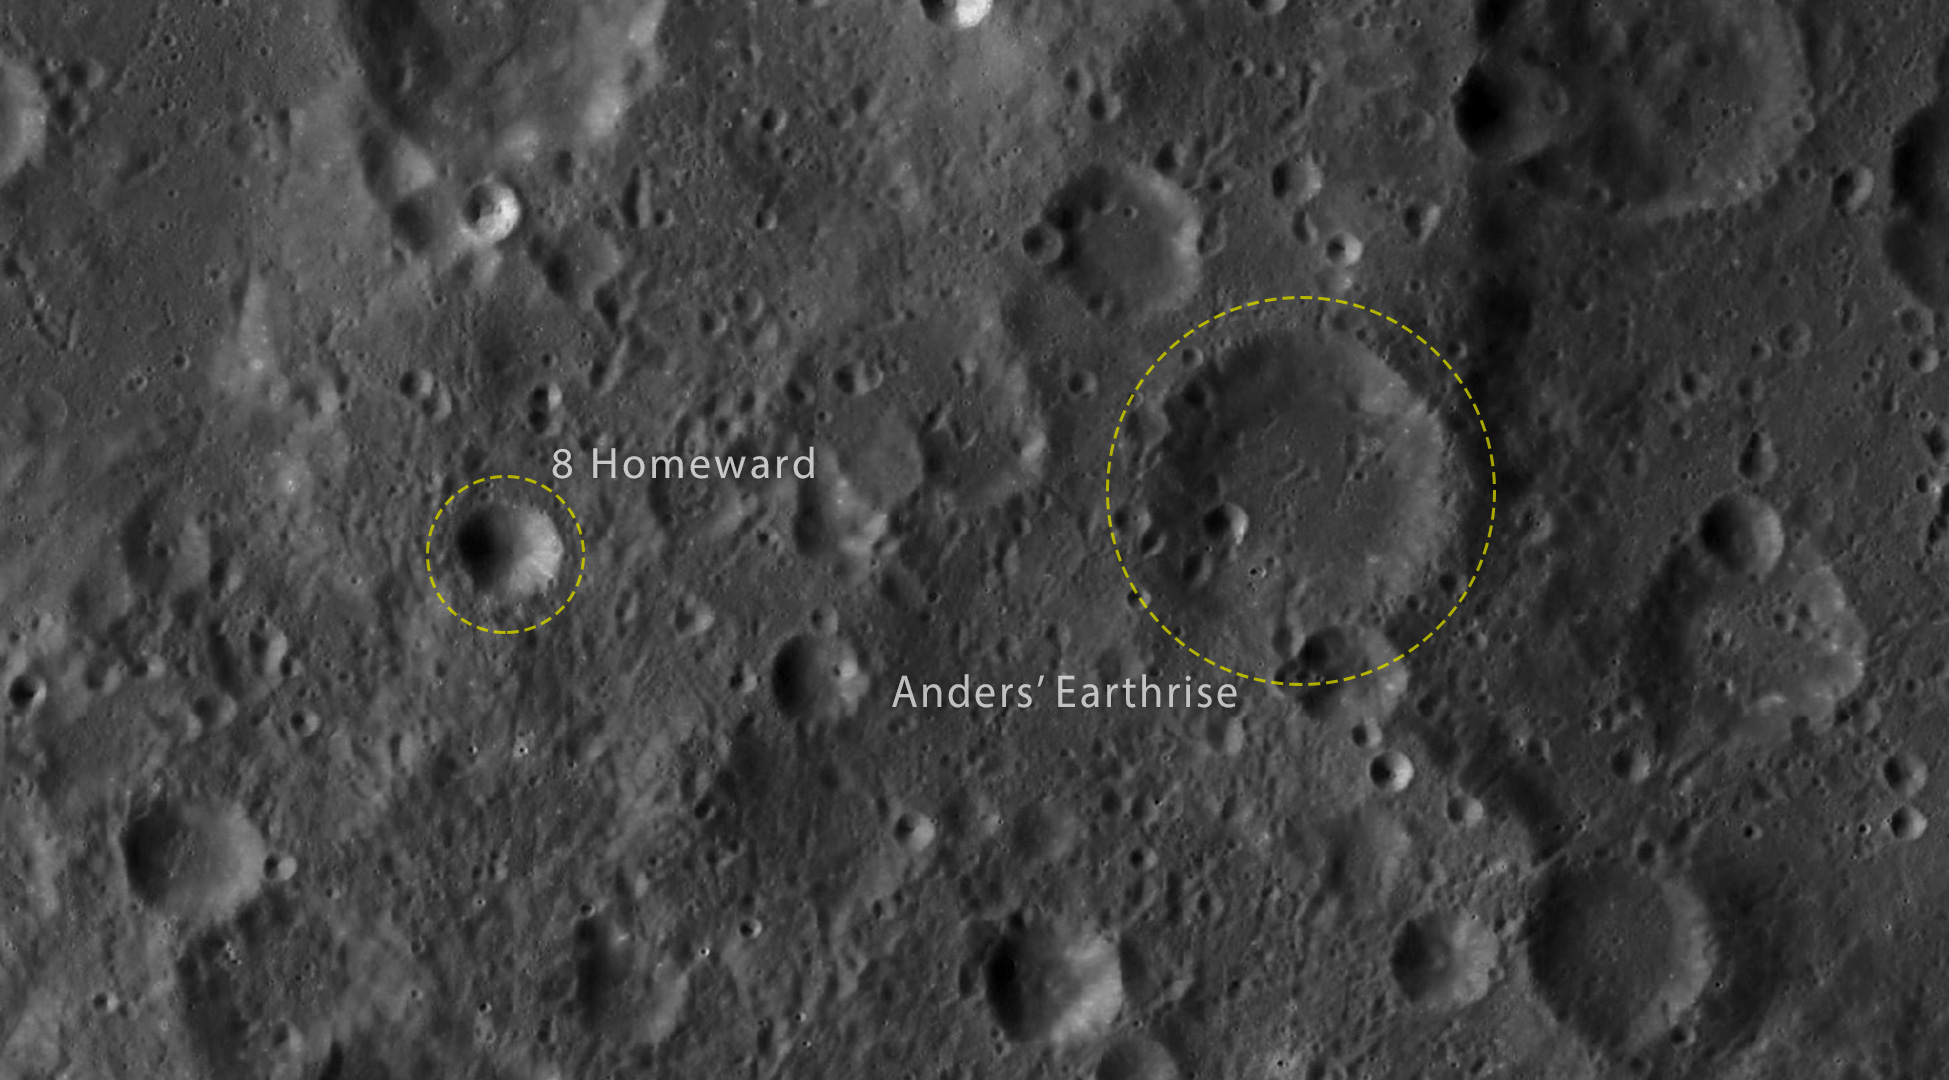 Orbital view of the Moon with new 8 Homeward and Ander's Earthrise highlighted and labeled.